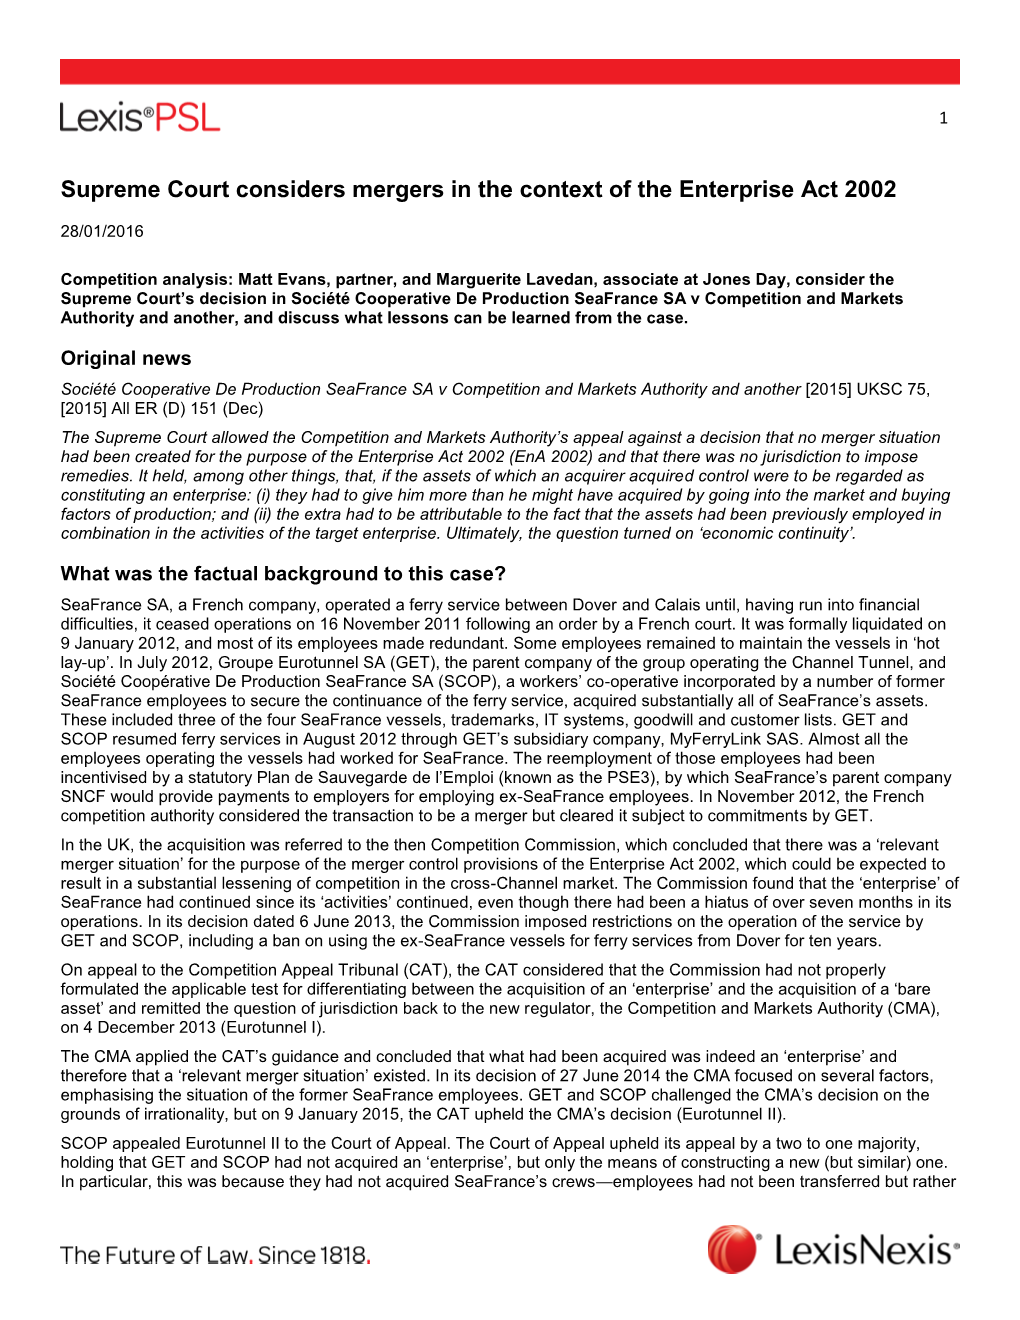 Supreme Court Considers Mergers in the Context of the Enterprise Act 2002